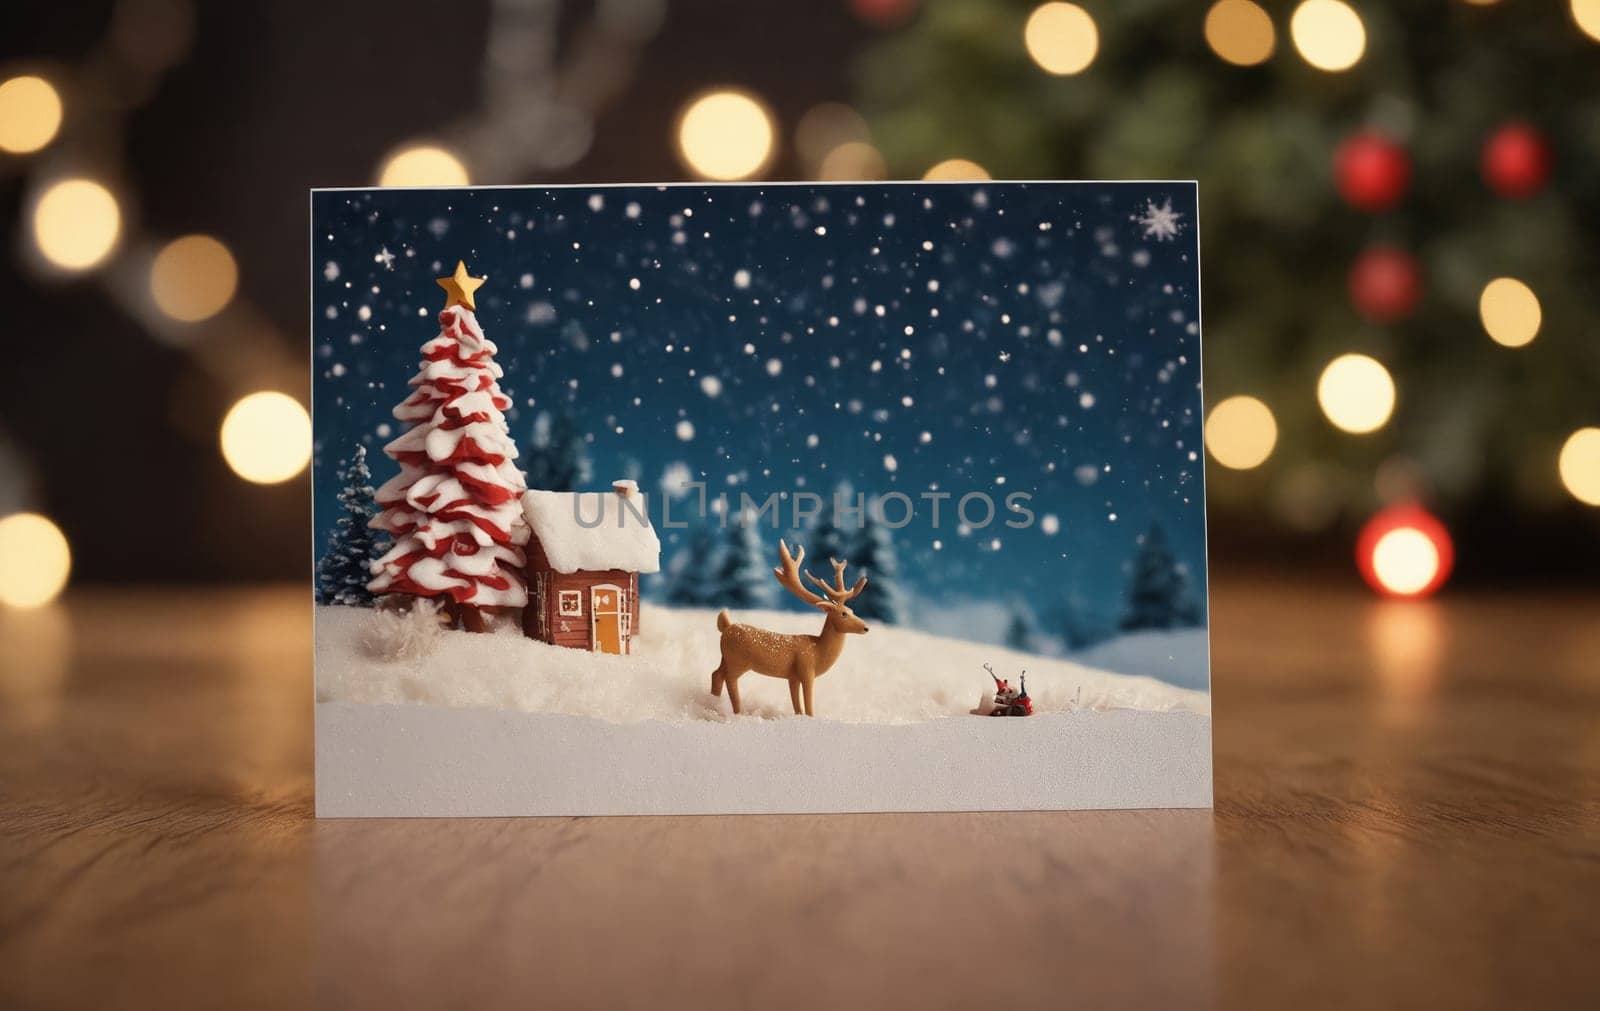 Immerse in the warmth of the Christmas season with this pictorial greeting card surrounded by a vibrantly decorated tree and gifts. The card conveys the message Merry Christmas in a handwritten style.